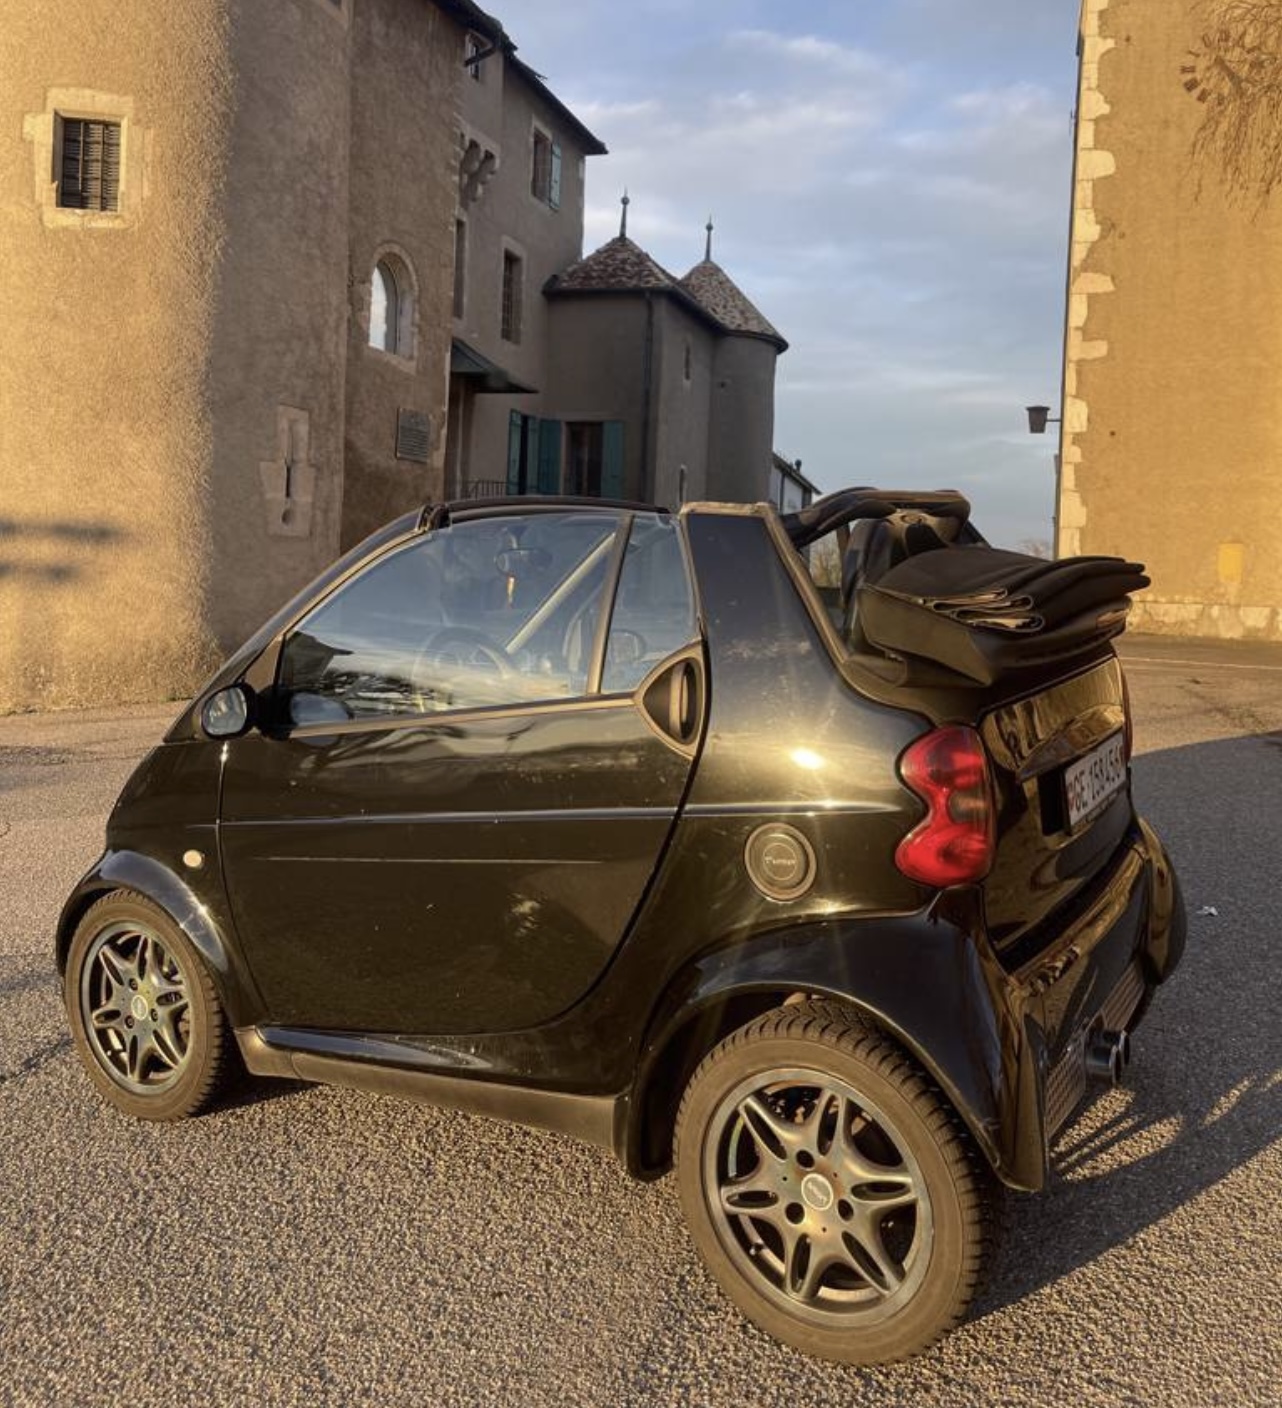 Smart Fortwo 450 Brabus Cabriolet premi鑢e 閐ition 